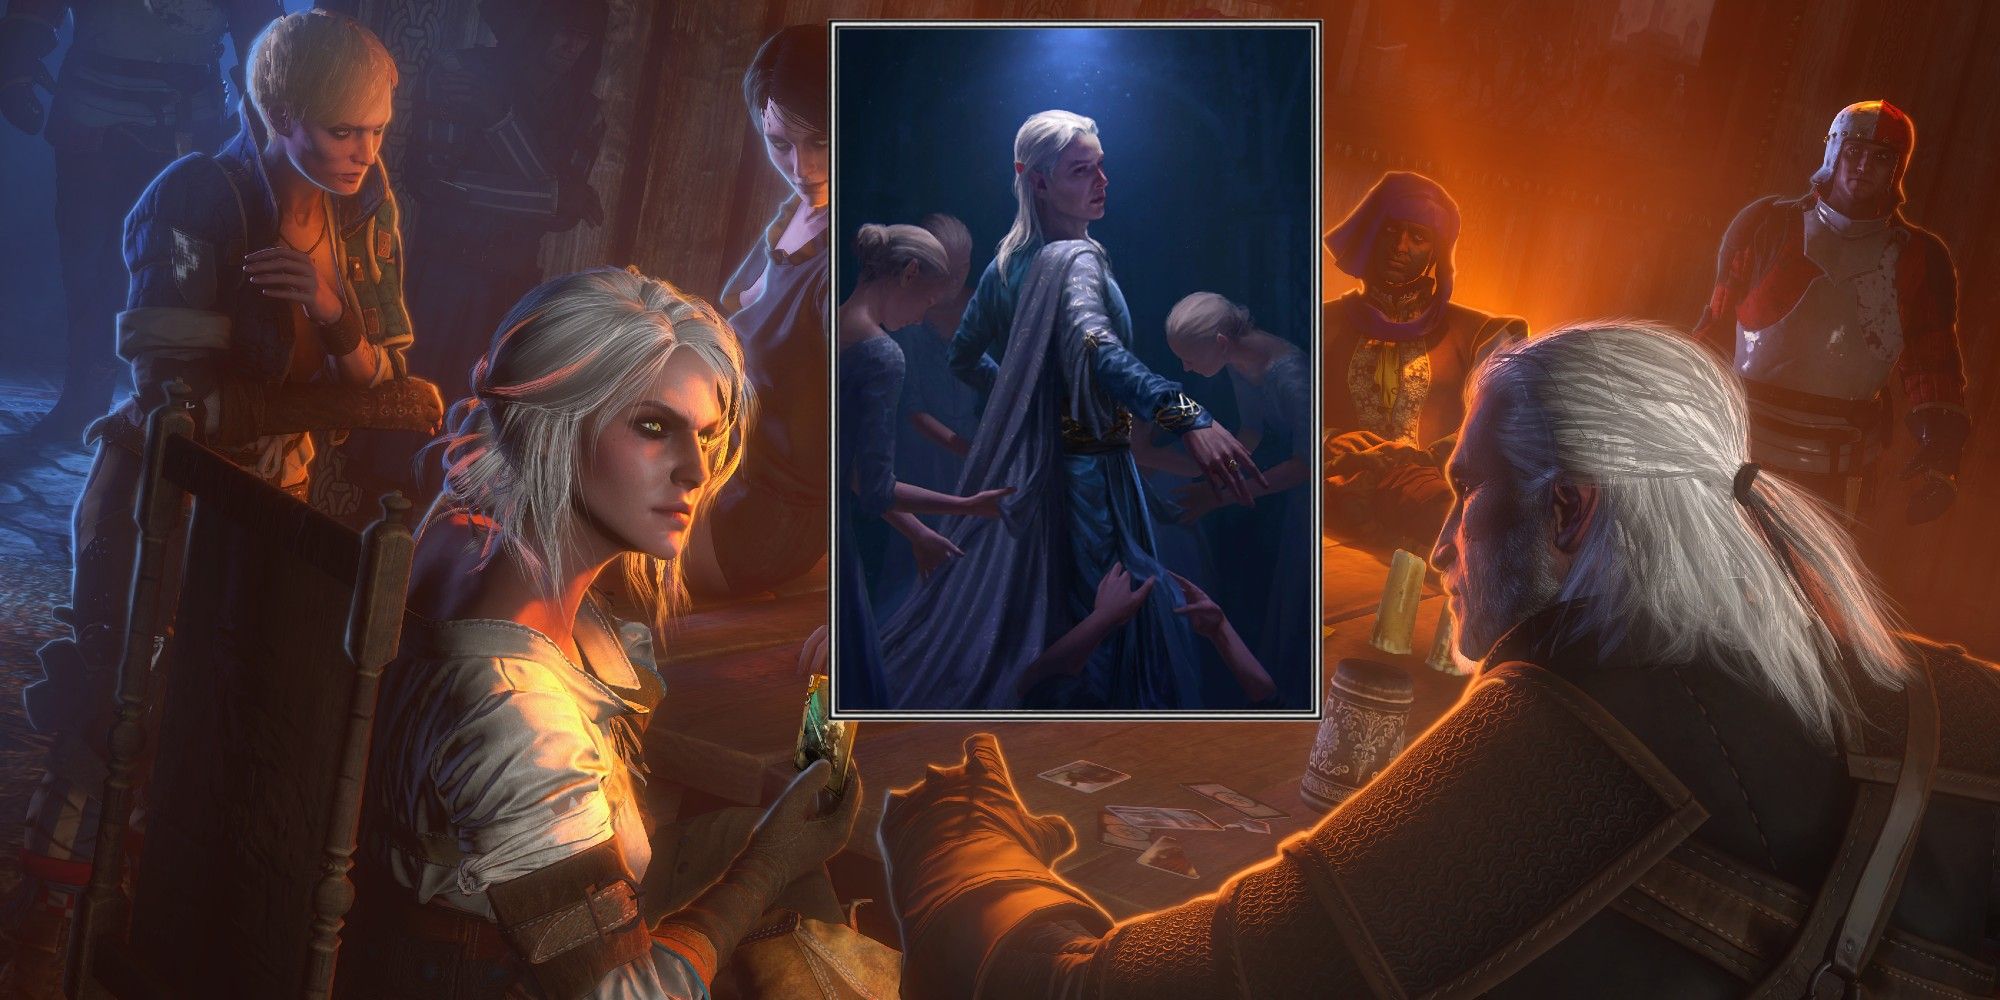 Filavandrel is a Leader card in Gwent within the Witcher 3: Wild Hunt, but he first met Geralt long before the games.